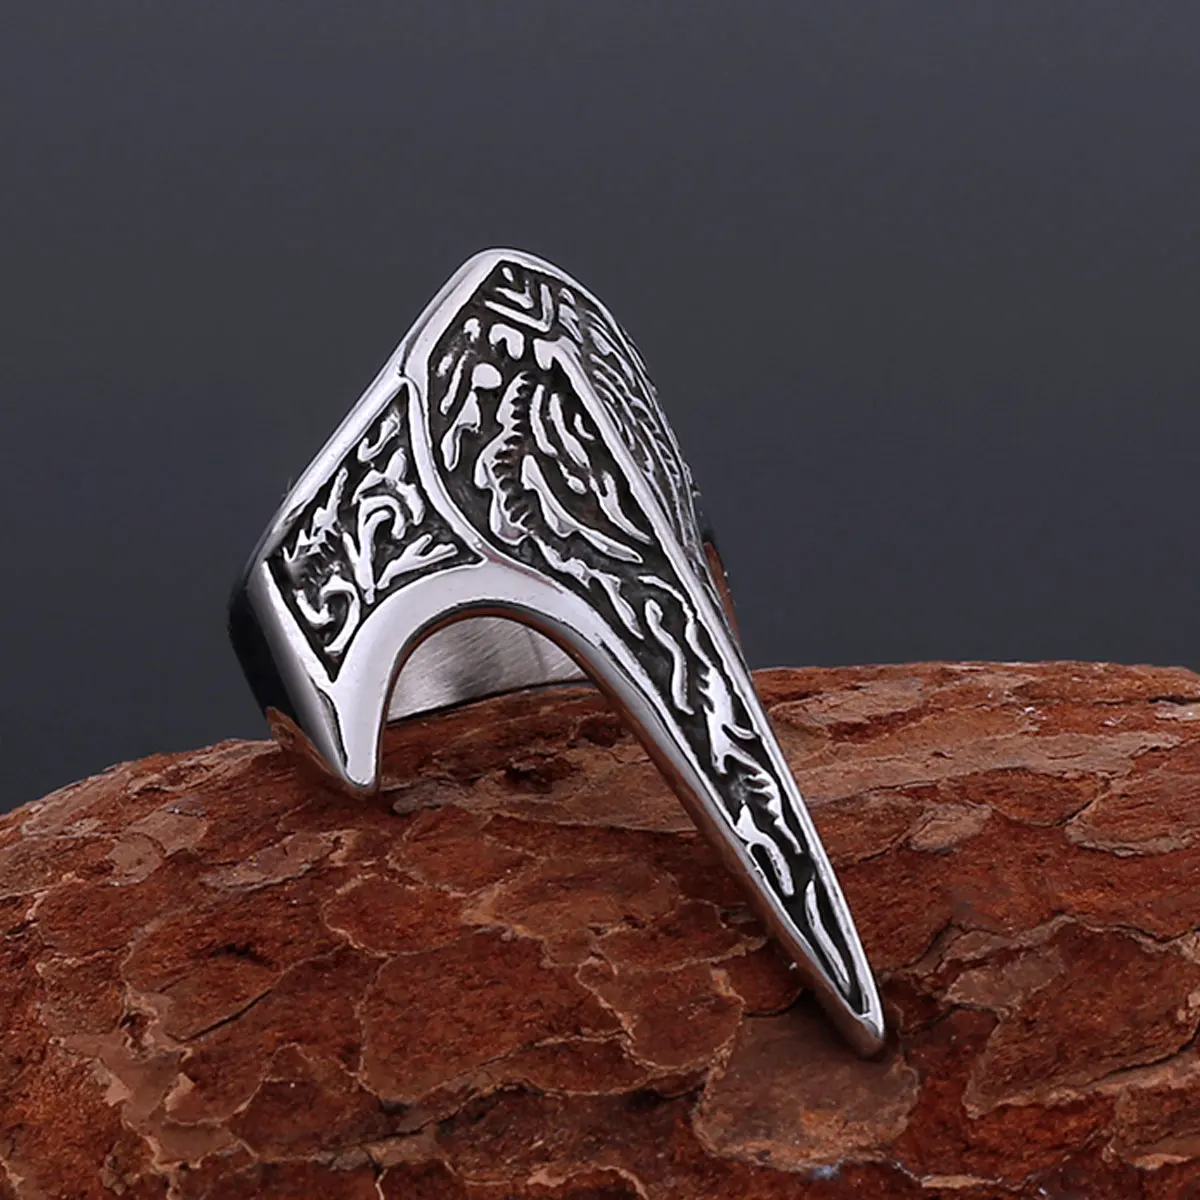 

316L Stainless Steel Retro Viking Ring Nordic Fashion Men's Odin Valknut Amulet Ring Teen Locomotive Jewelry Party Accessories